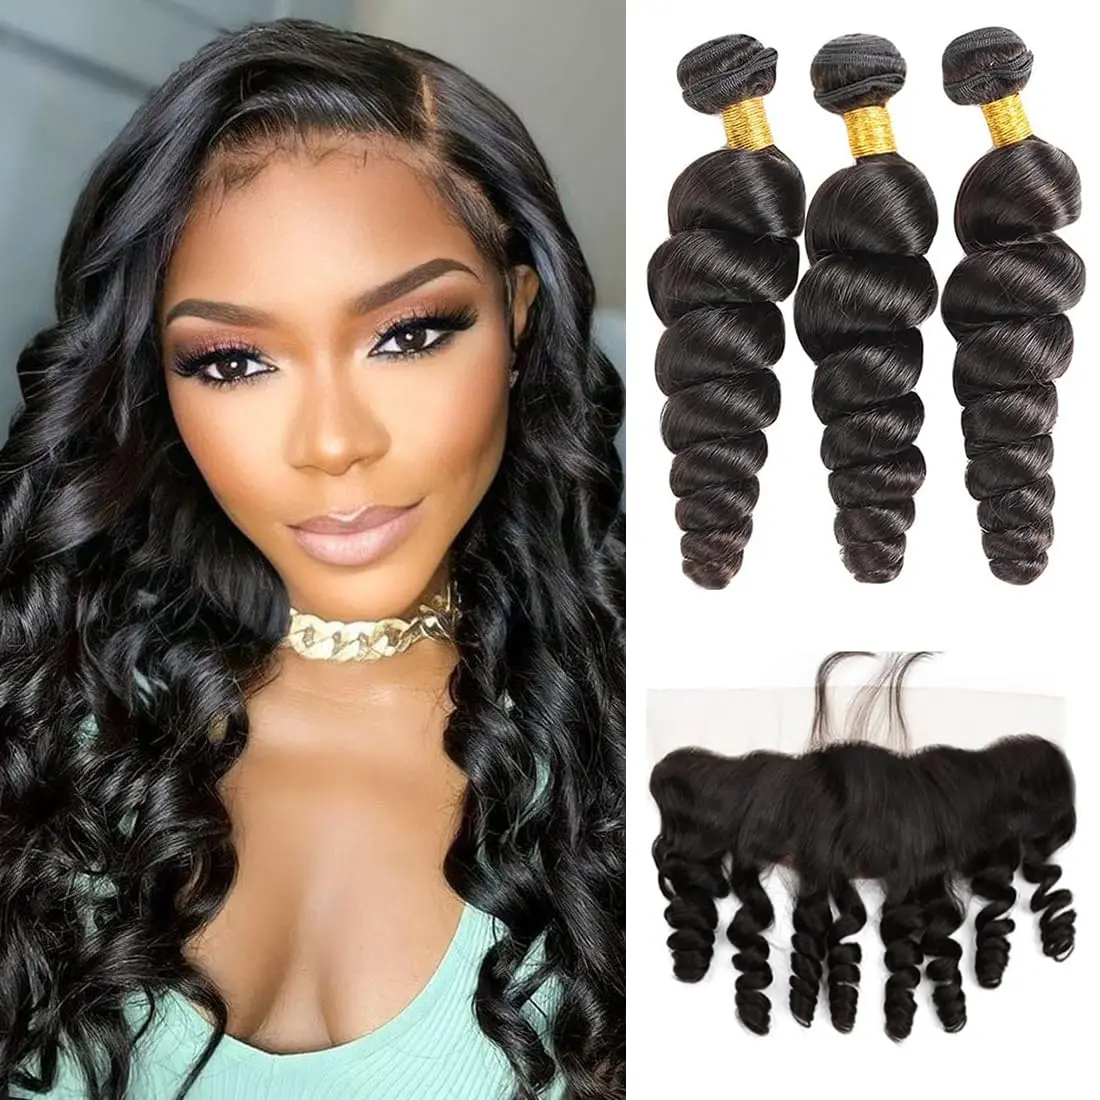 

Peruvian Human Hair Loose Wave Bundles with Frontal Ear to Ear 13x4 Free Part Lace Frontal 100% Unprocessed Virgin Human Hair